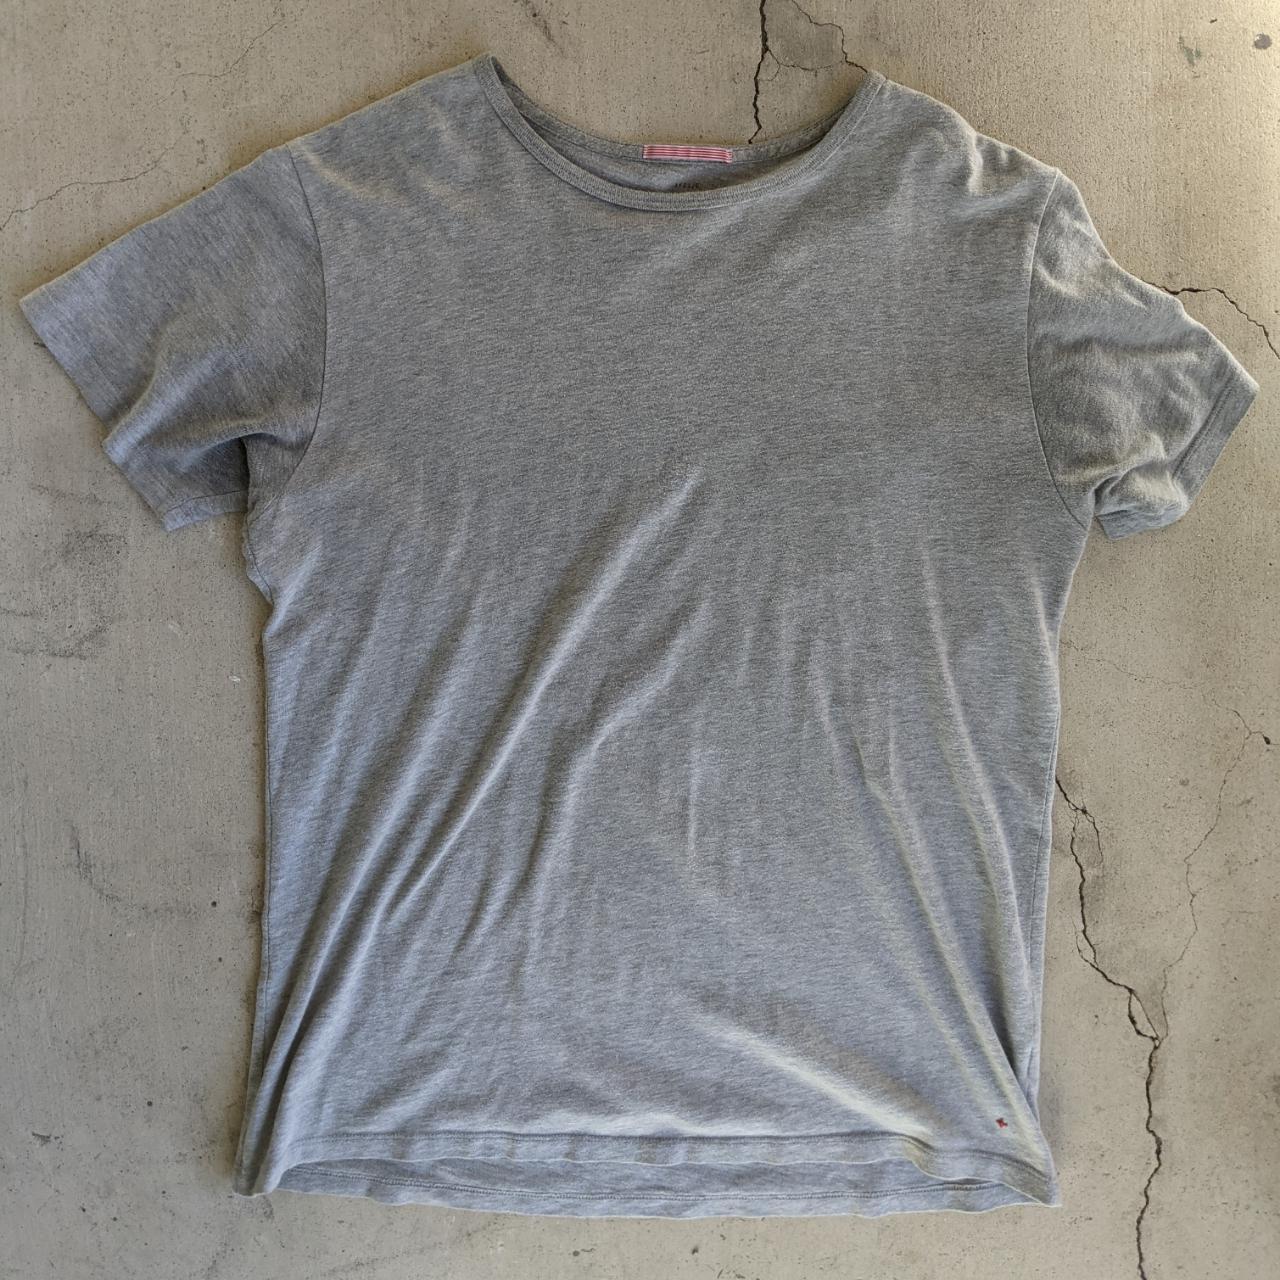 Product Image 1 - Apolis Global Citizen tshirt

Incredibly soft